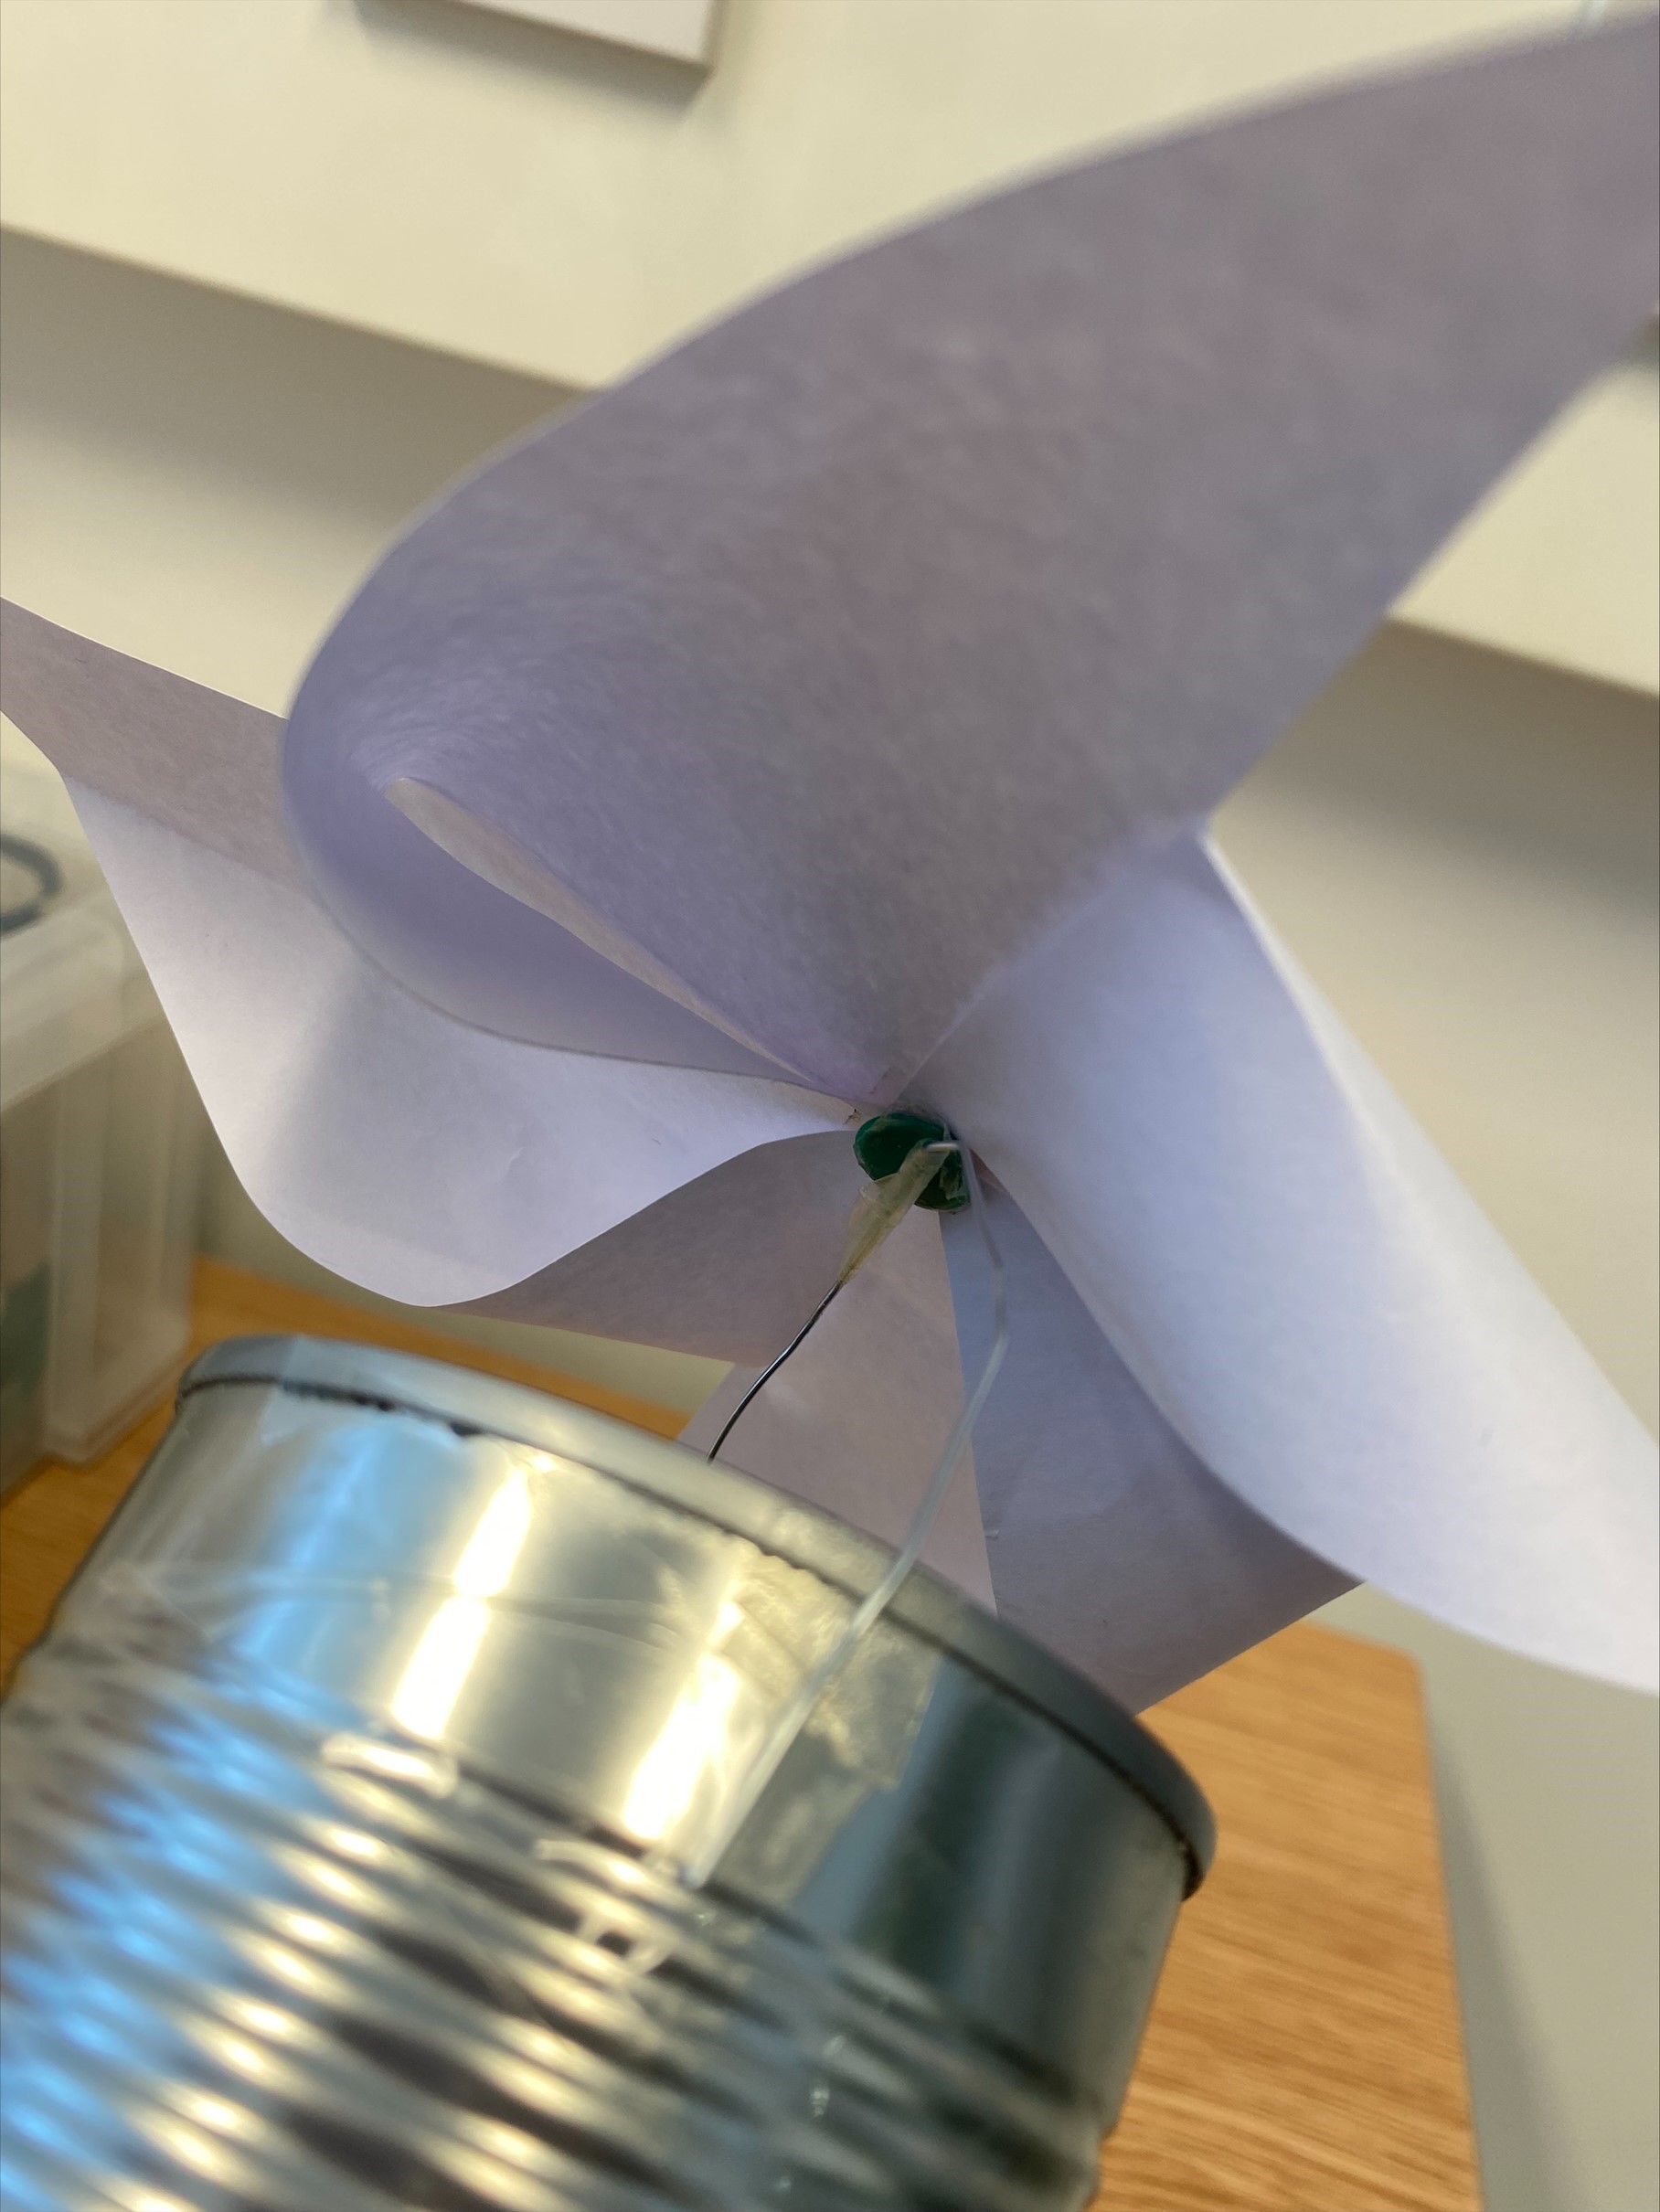 Tin can with a paper clip across the top and a paper windmill attached on top